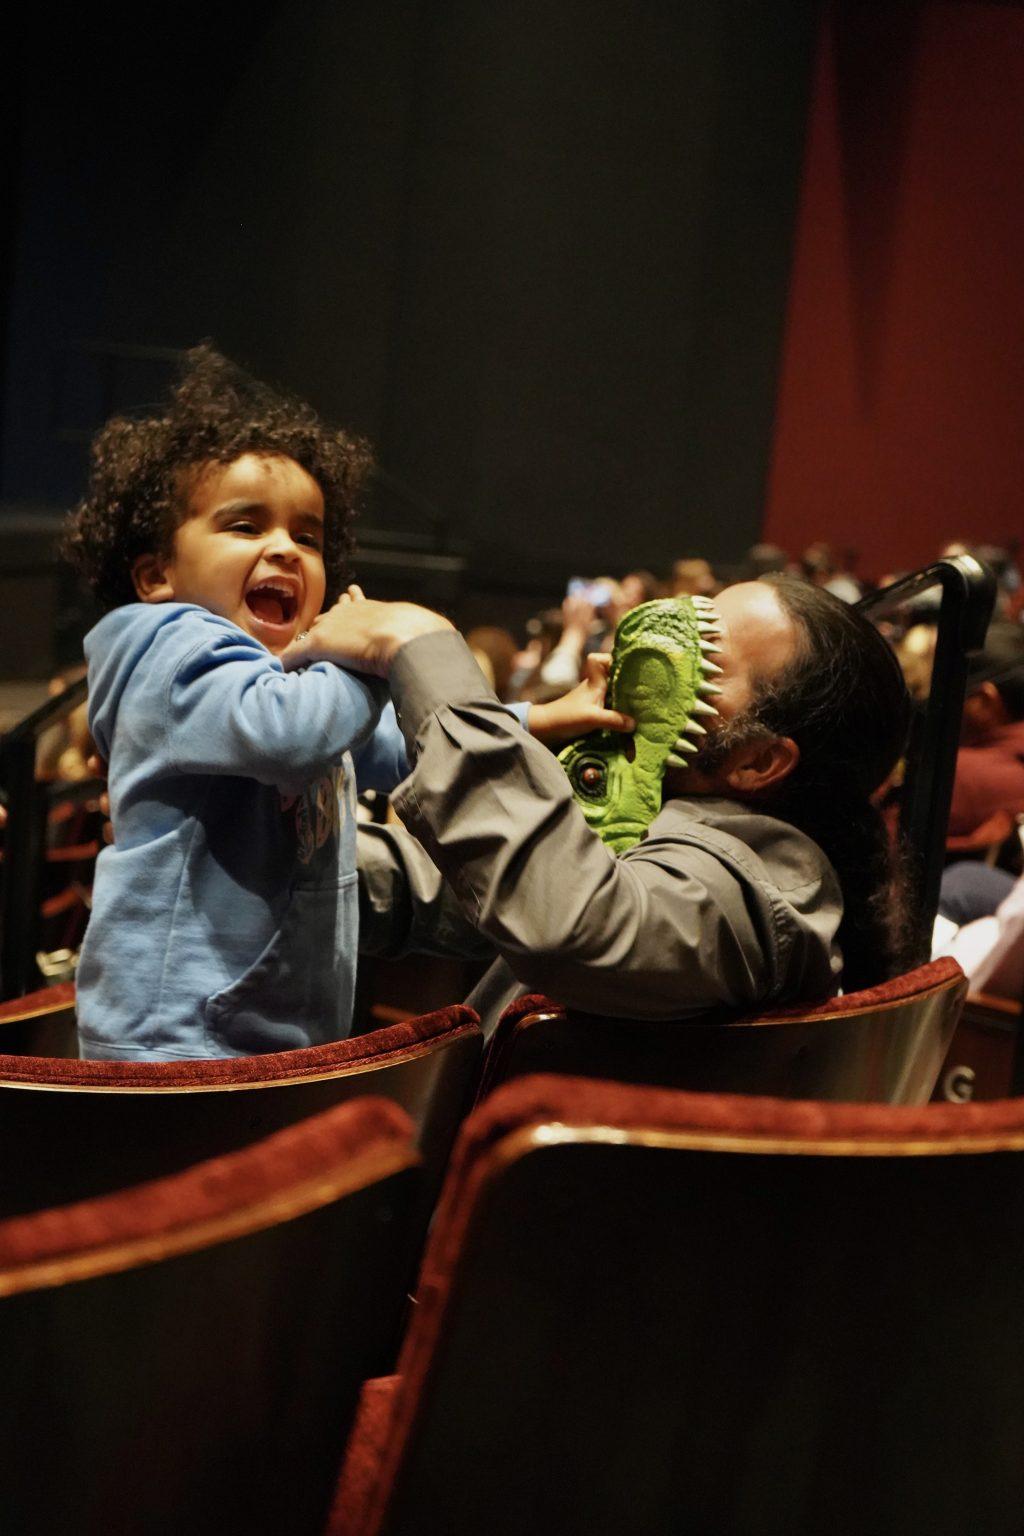 A child with his dad anticipates the show in Smothers Theatre on March 8. Before being seated, they bought "Dinosaur World Live" merchandise from a kiosk in the reception area.